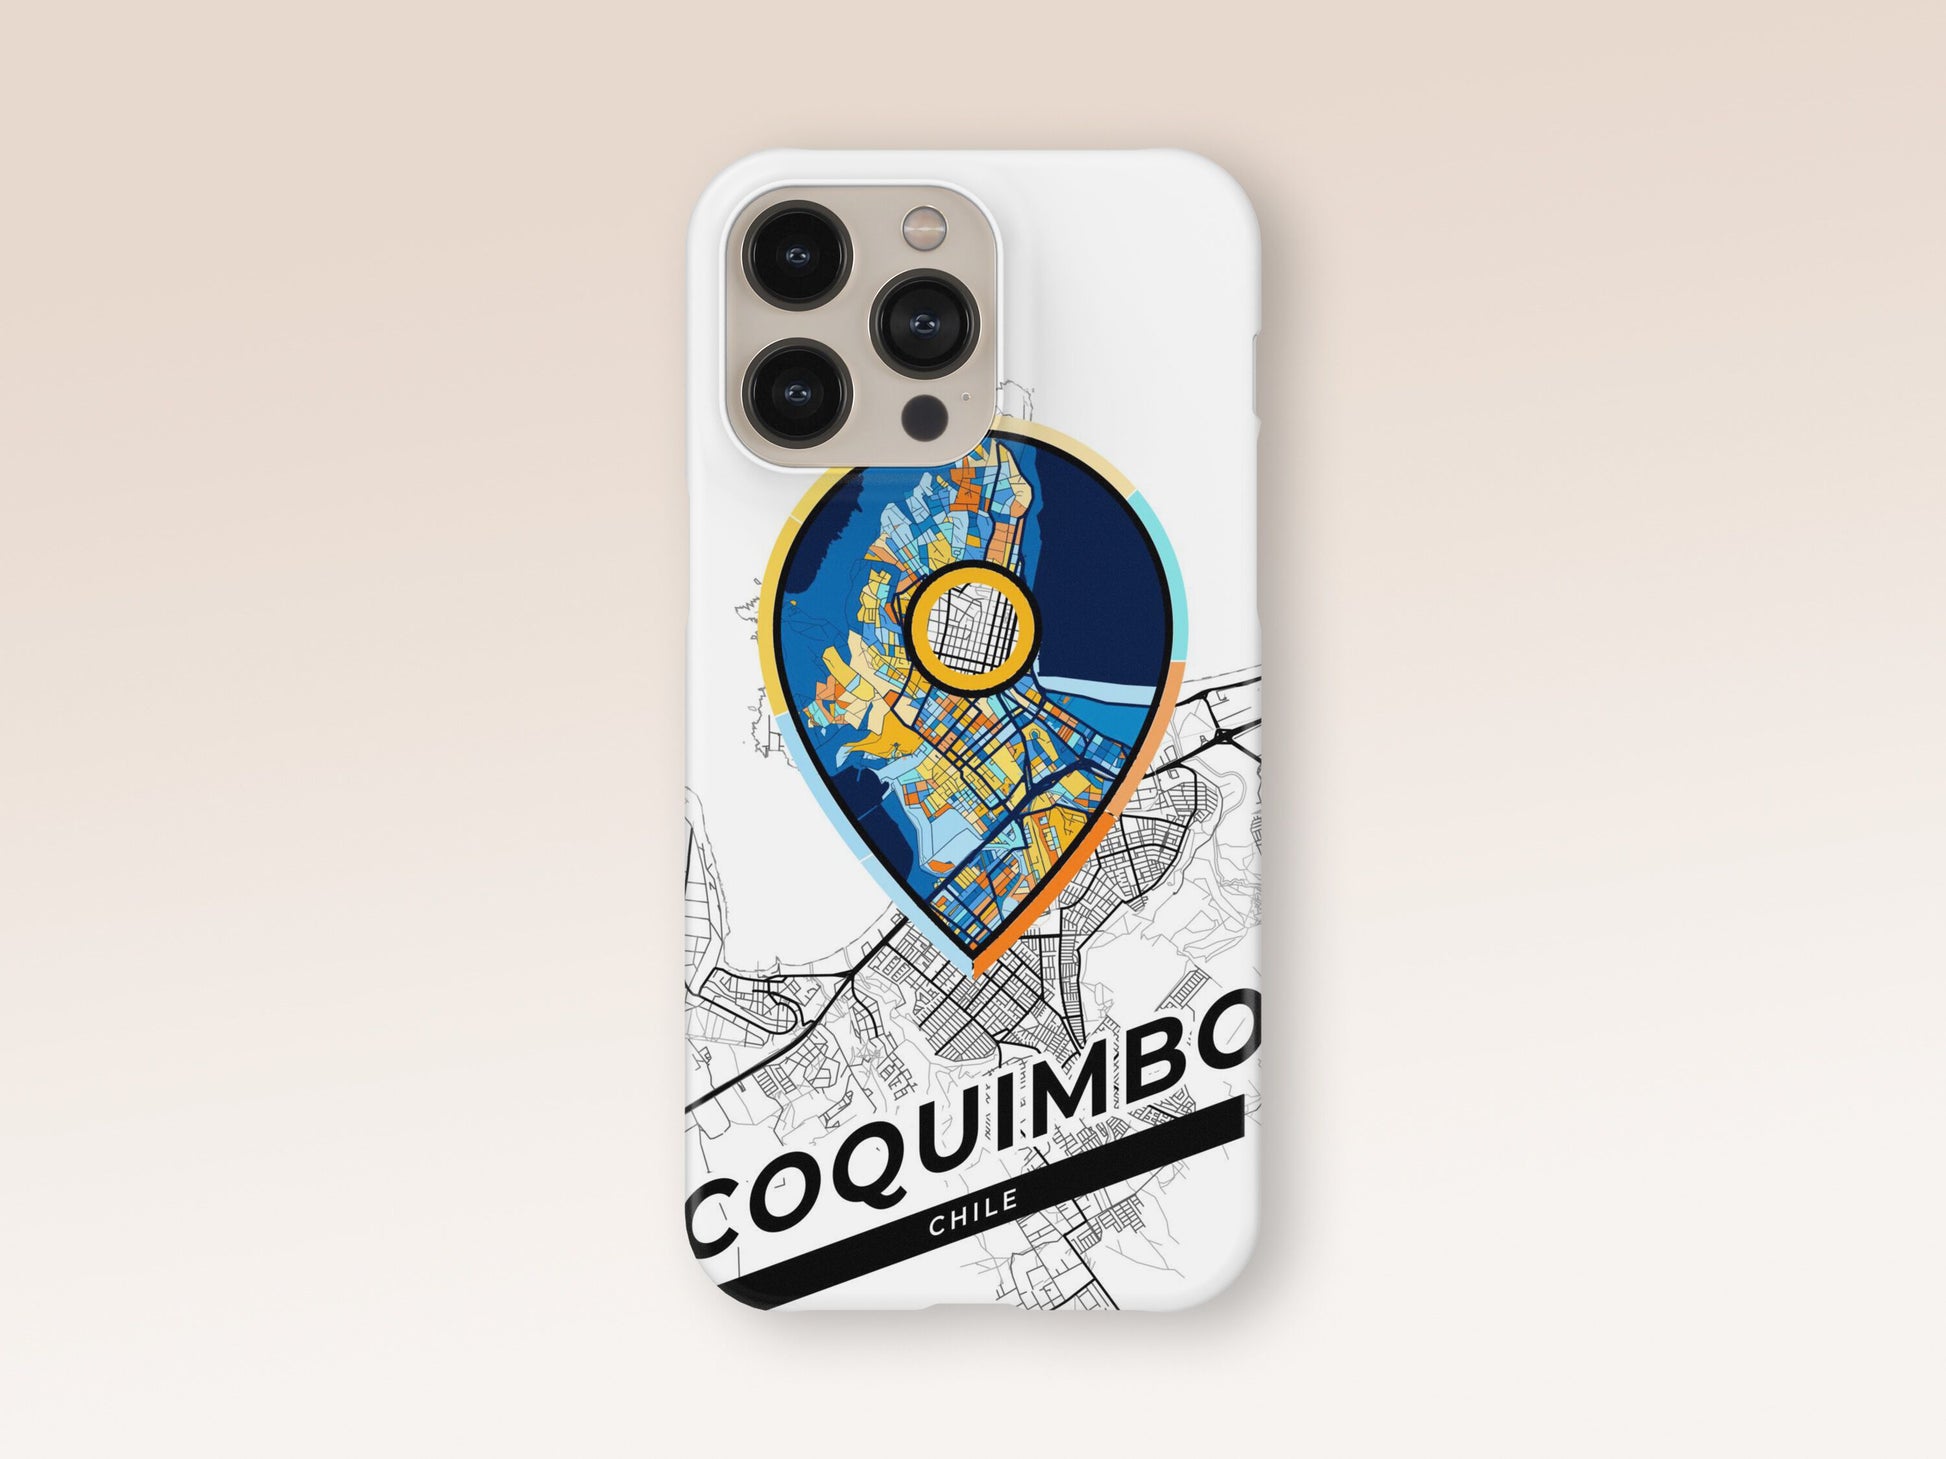 Coquimbo Chile slim phone case with colorful icon. Birthday, wedding or housewarming gift. Couple match cases. 1